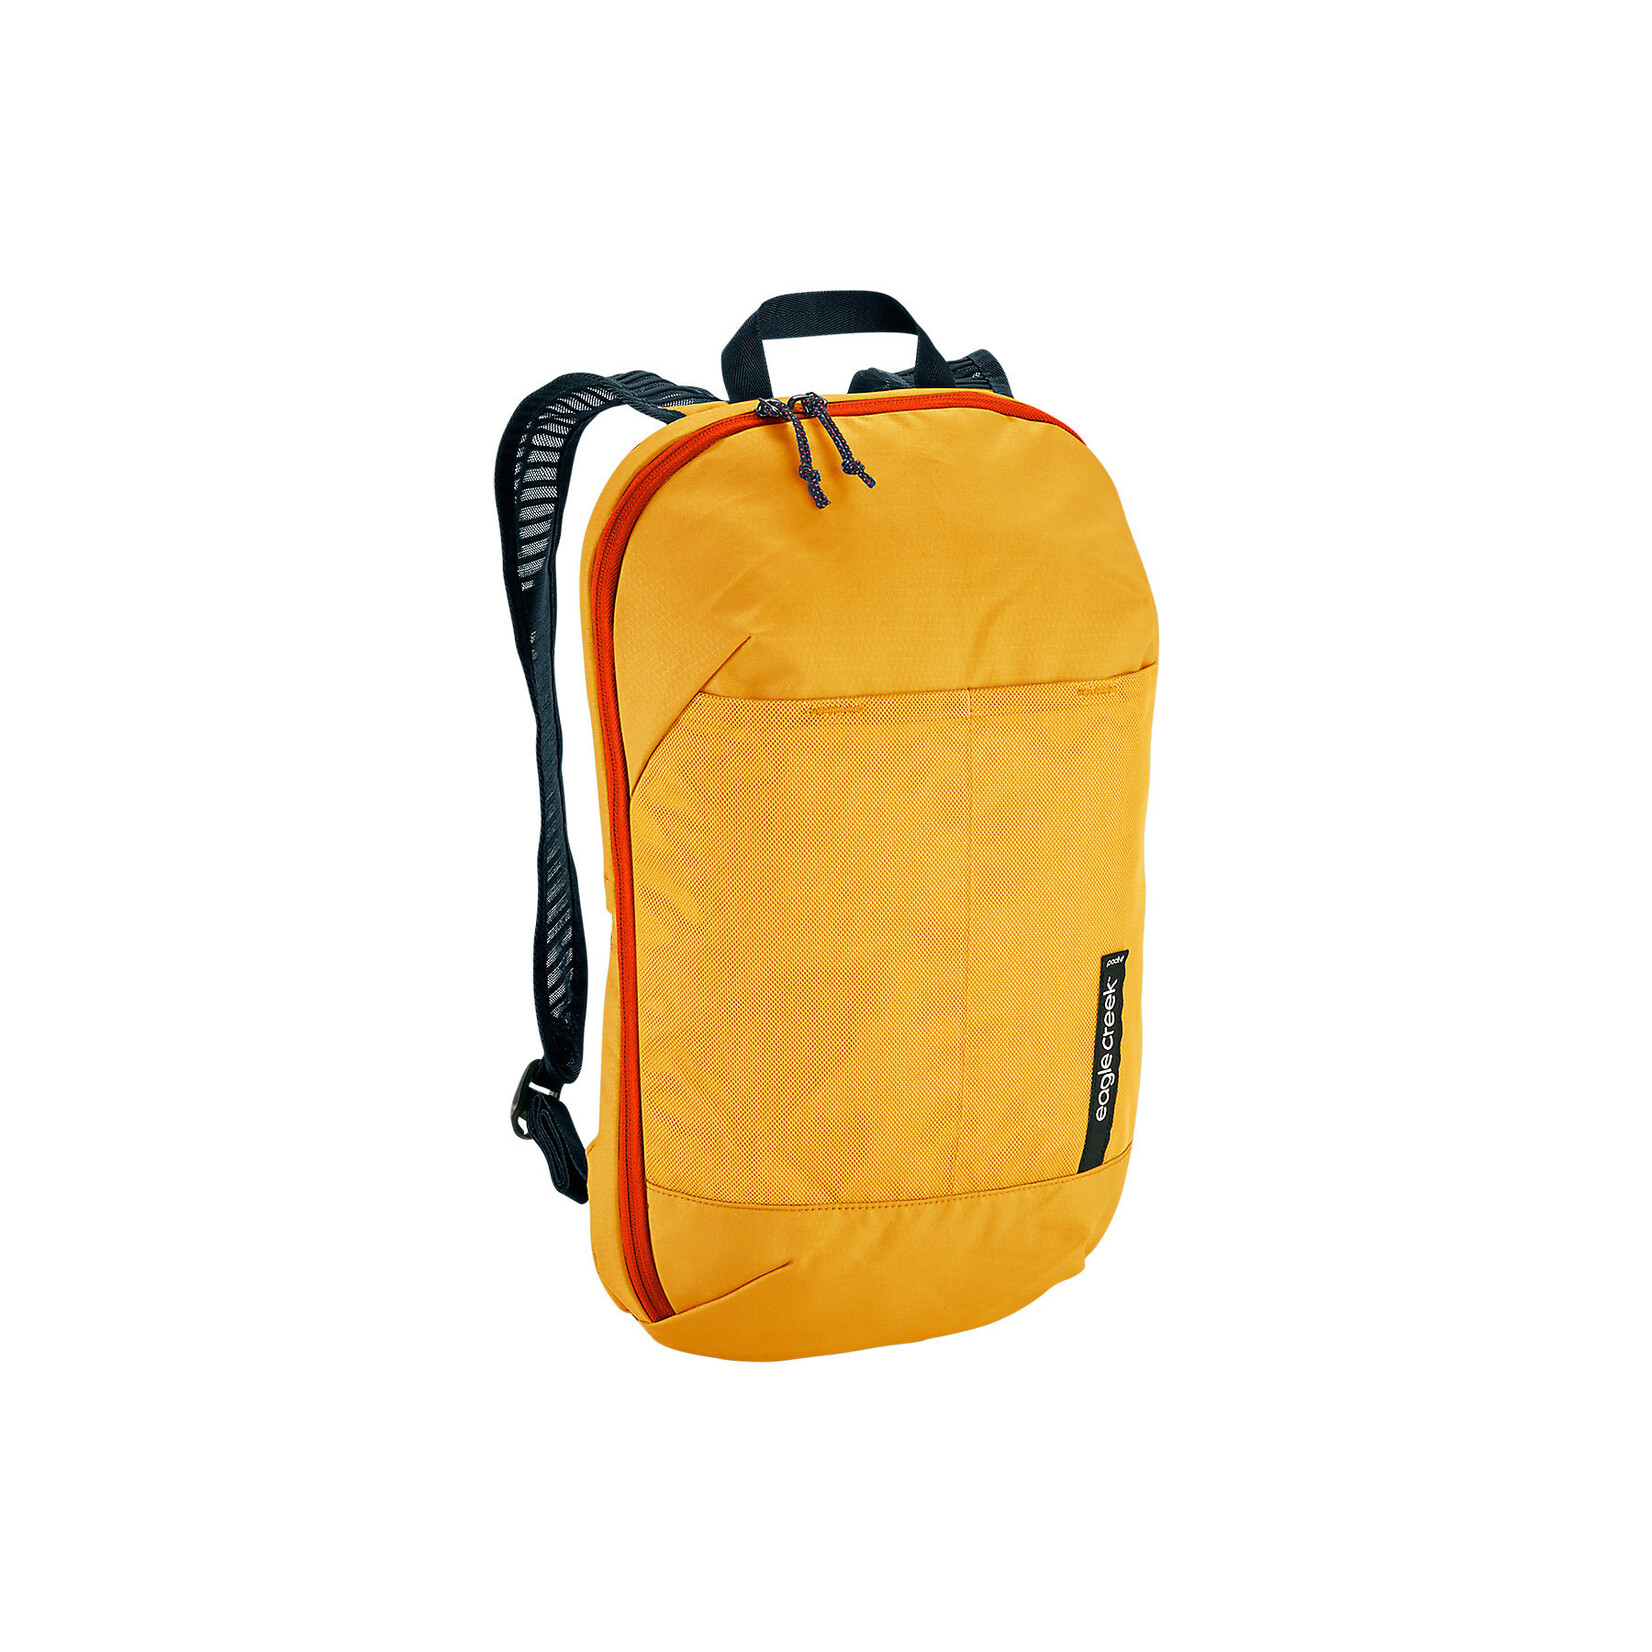 EAGLE CREEK PACK-IT REVEAL ORG CONVERTIBLE PACK